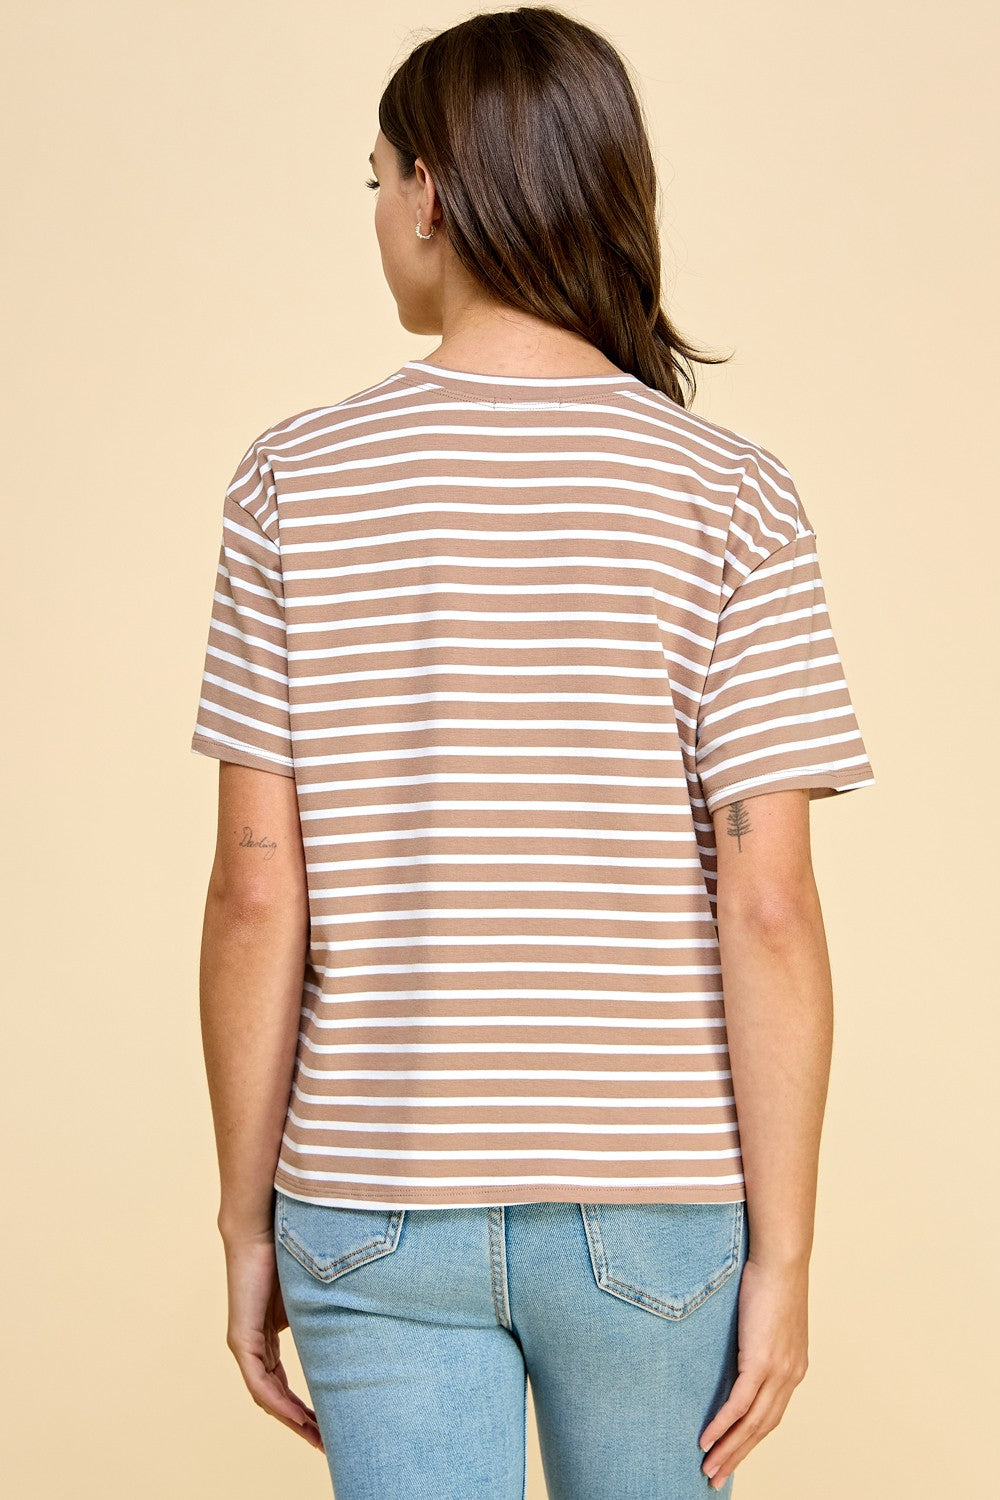 Keep on Going Taupe Striped Tee